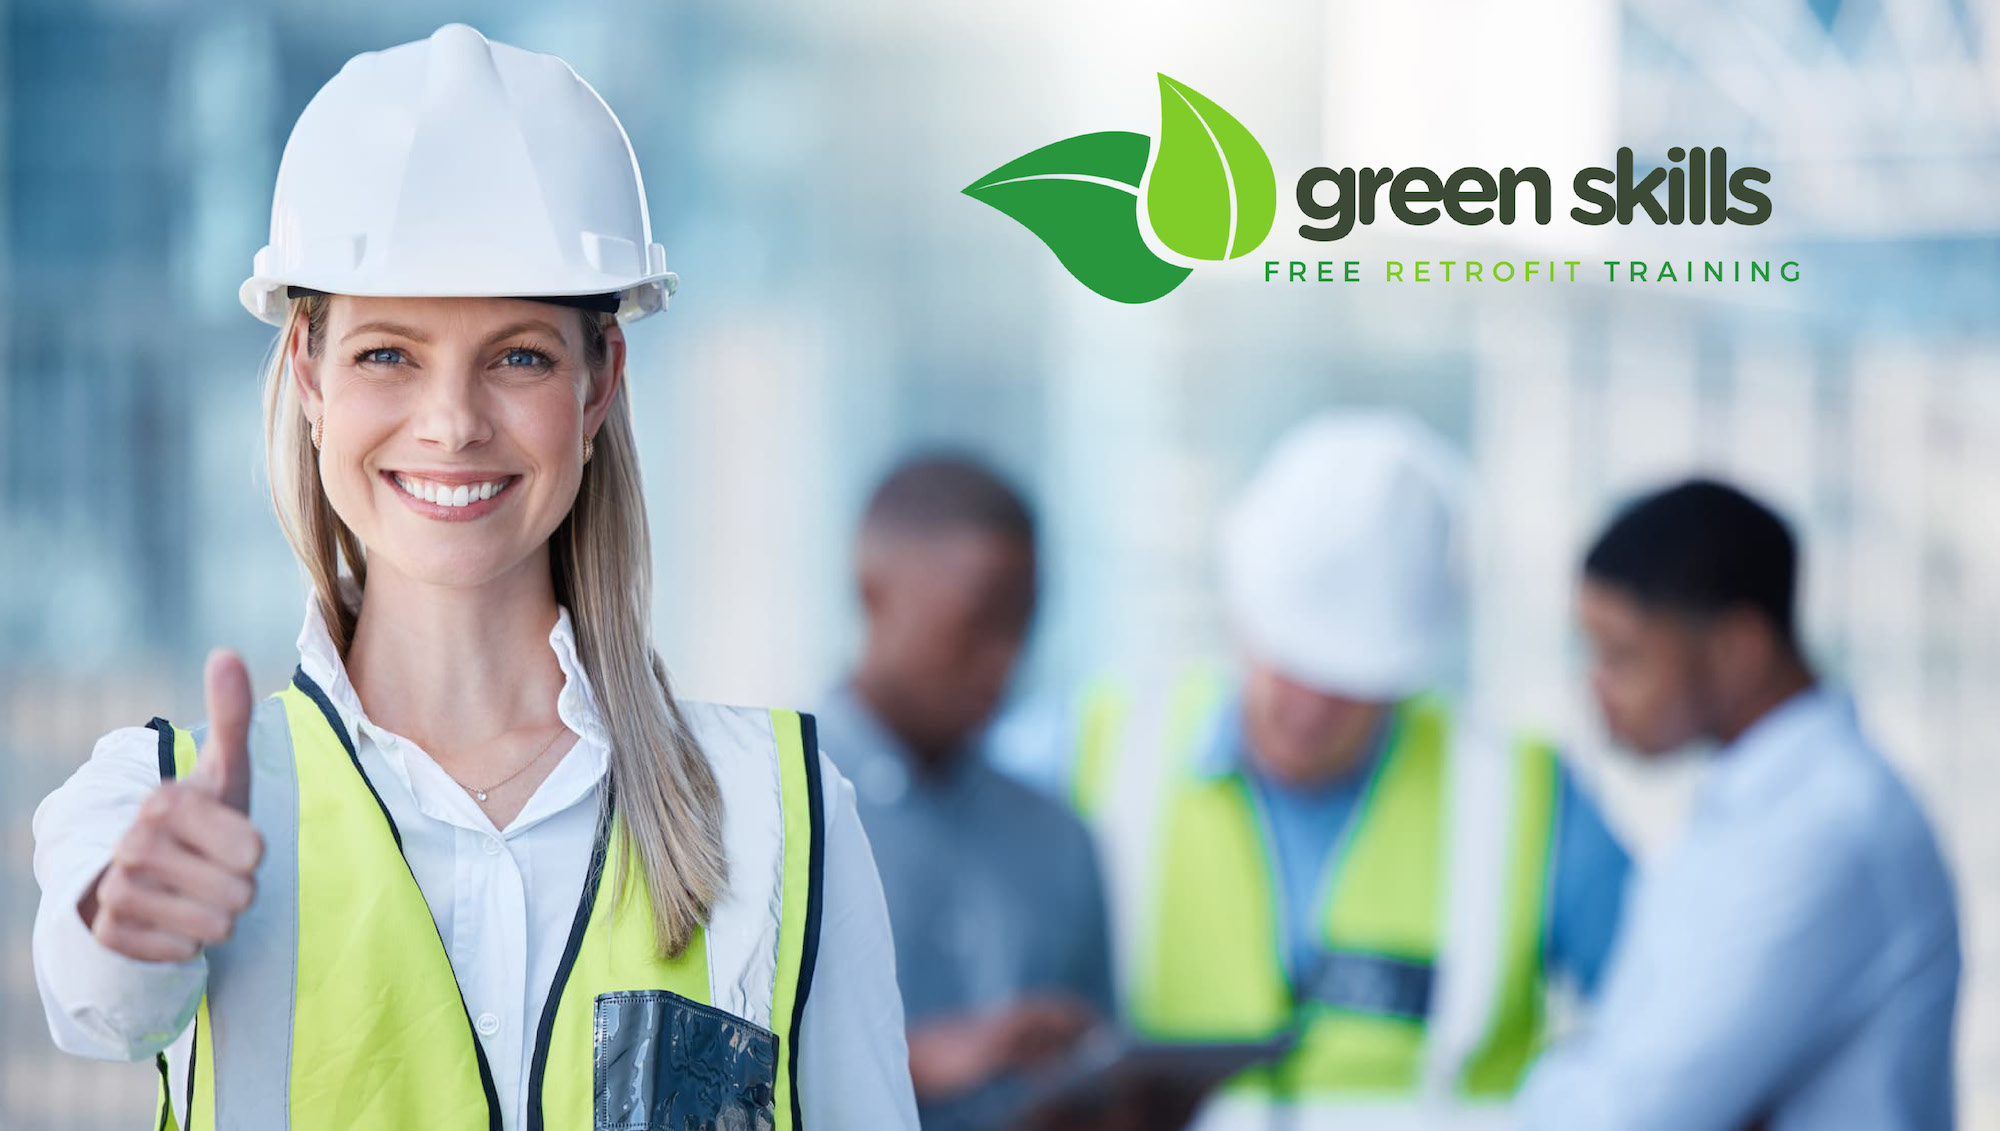 Woman standing with hard hat on giving the thumbs up